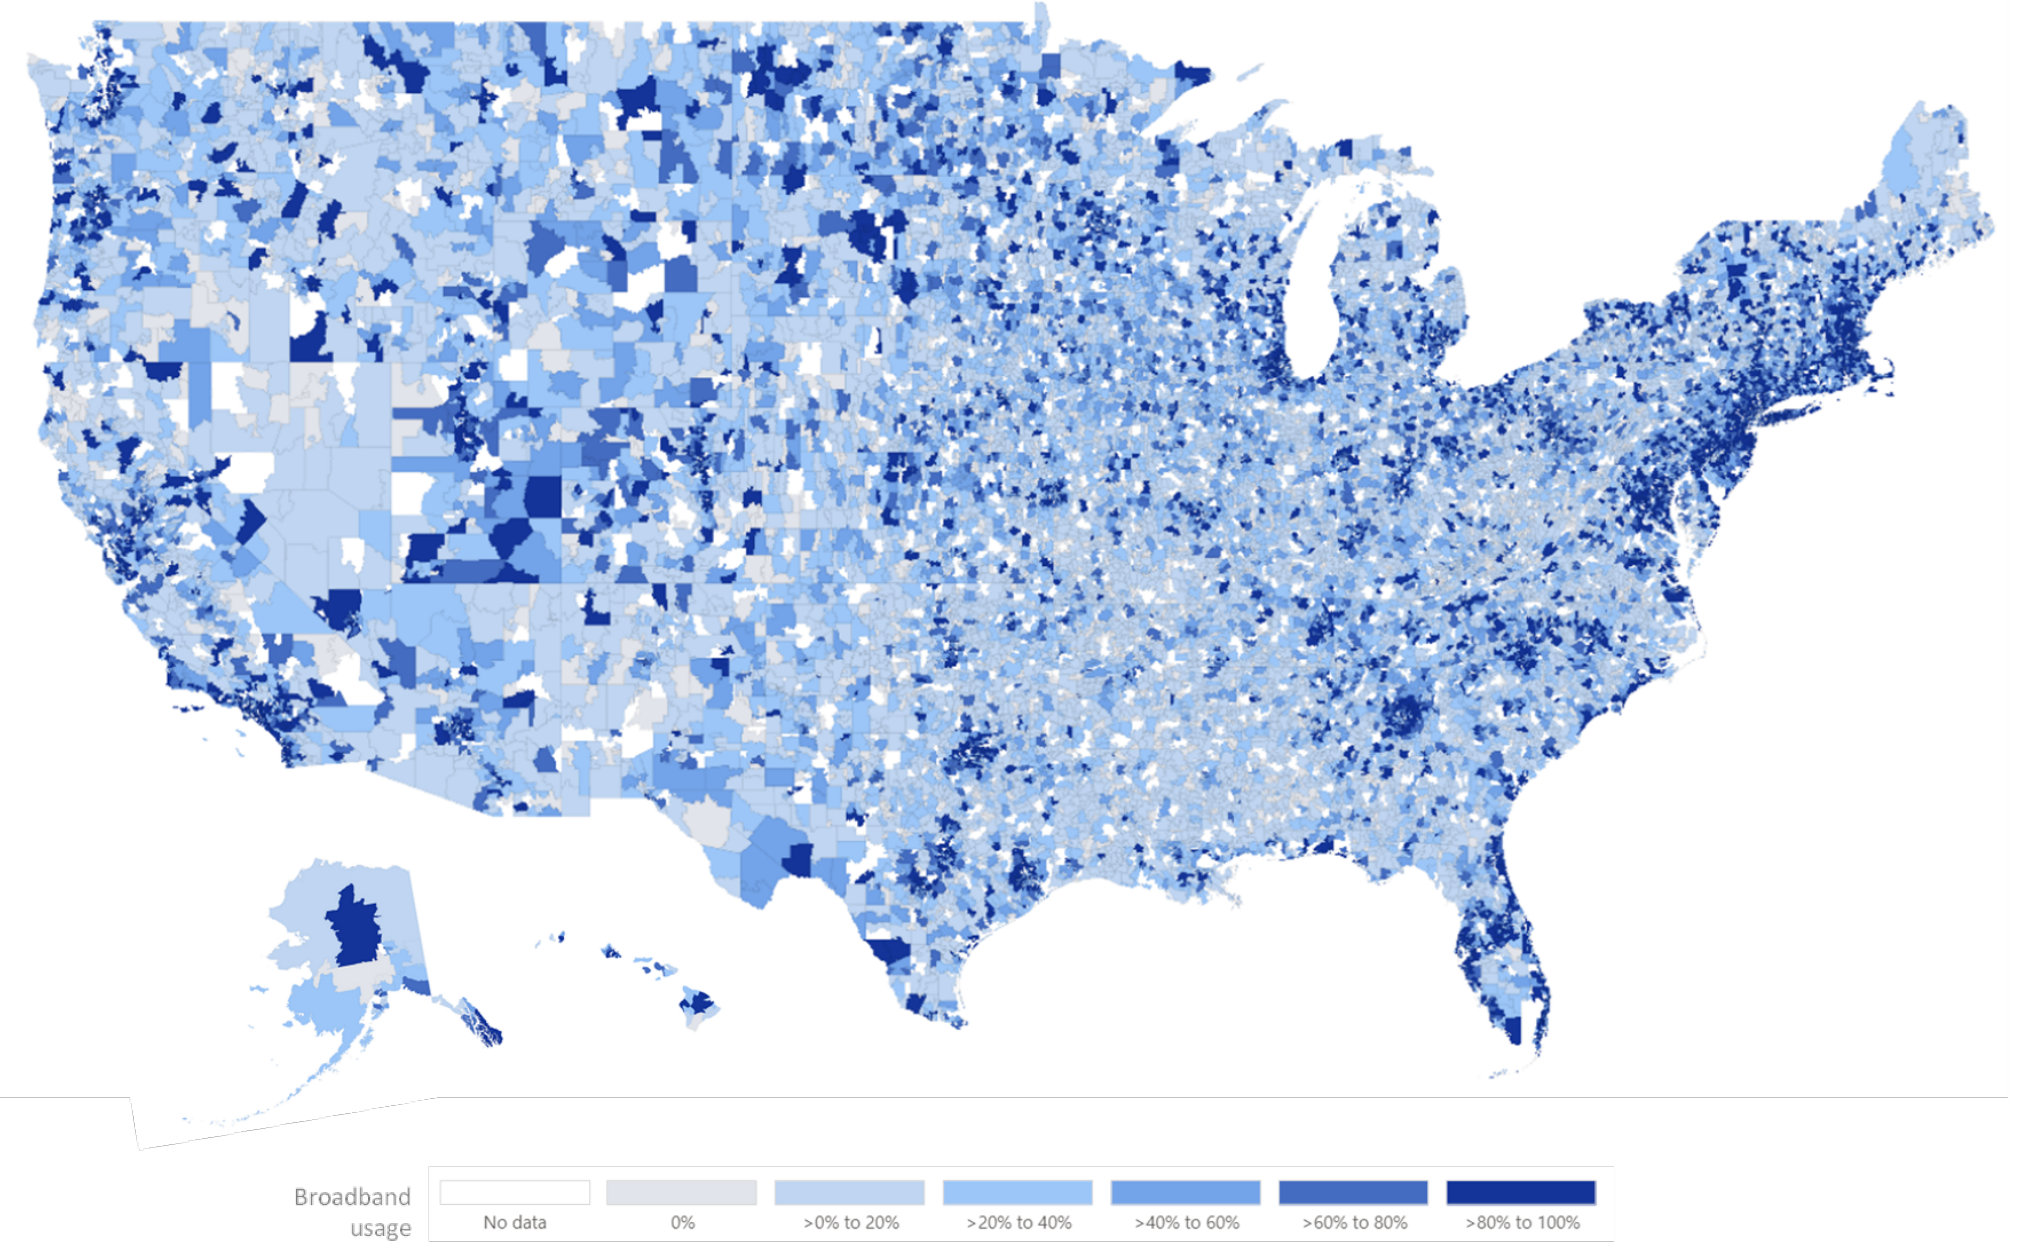 A map of the US where each postal code is colored according to the fraction of devices using broadband